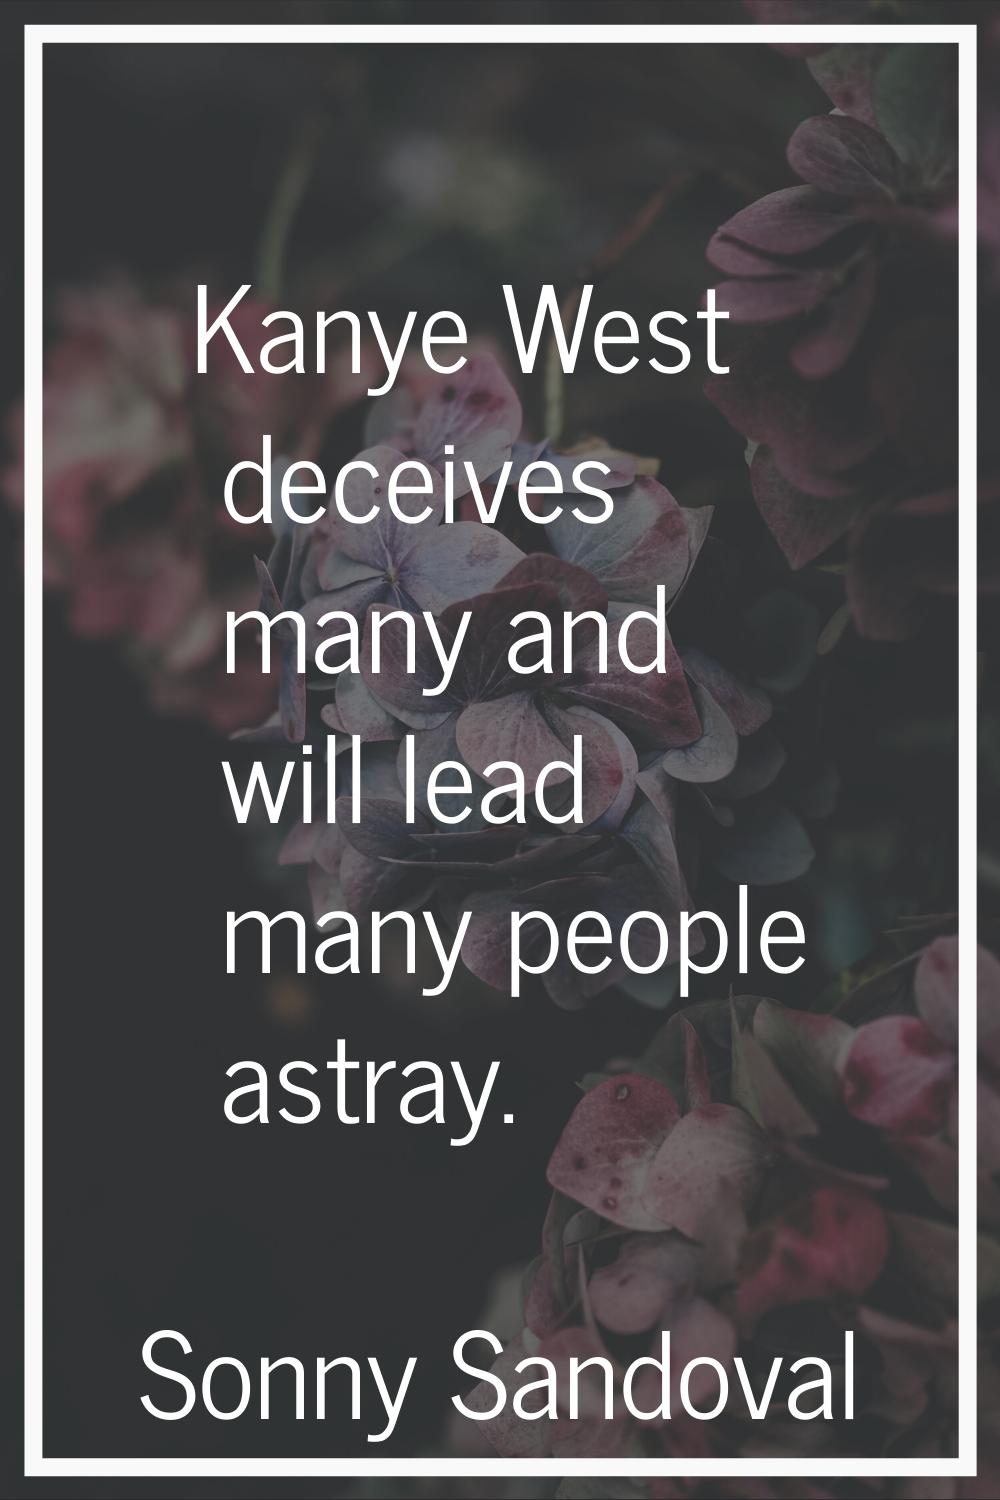 Kanye West deceives many and will lead many people astray.